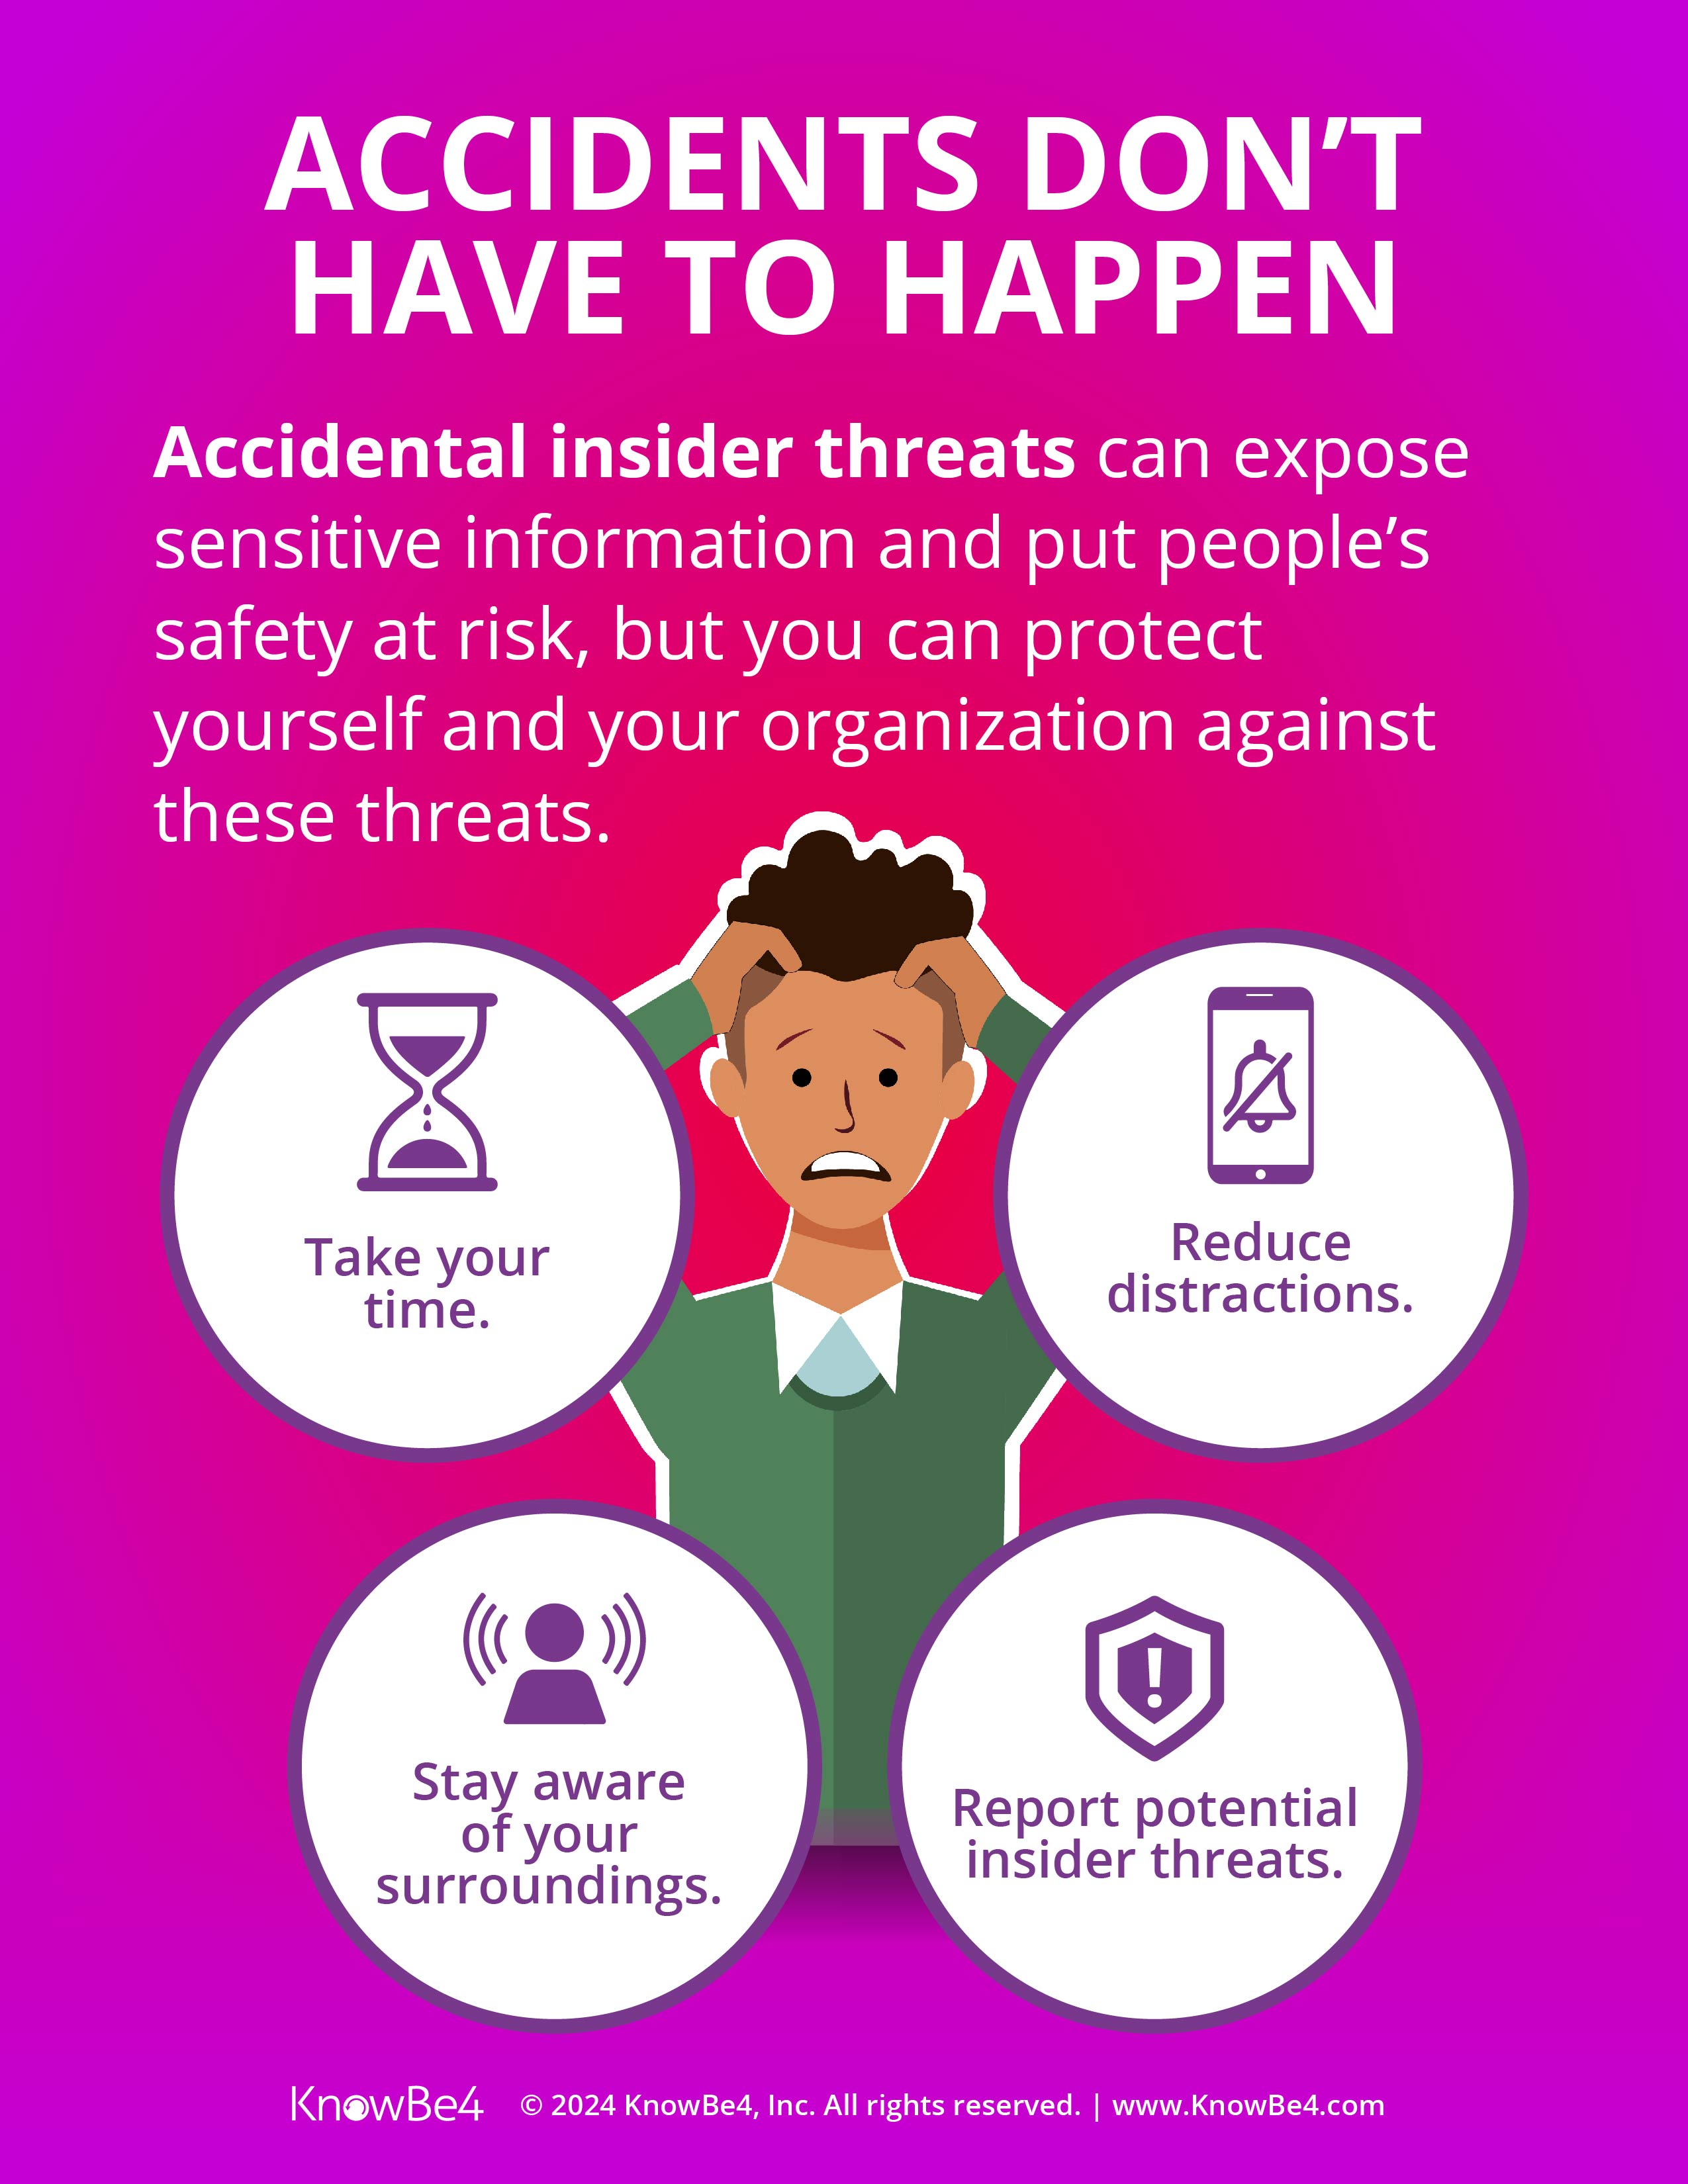 Accidents don't have to happen. Protect yourself and your organzation against Accidental Insider Threats. Take your Time. Reduce Distractions. Stay aware of your surroundings. Report Potential Insider Threats.